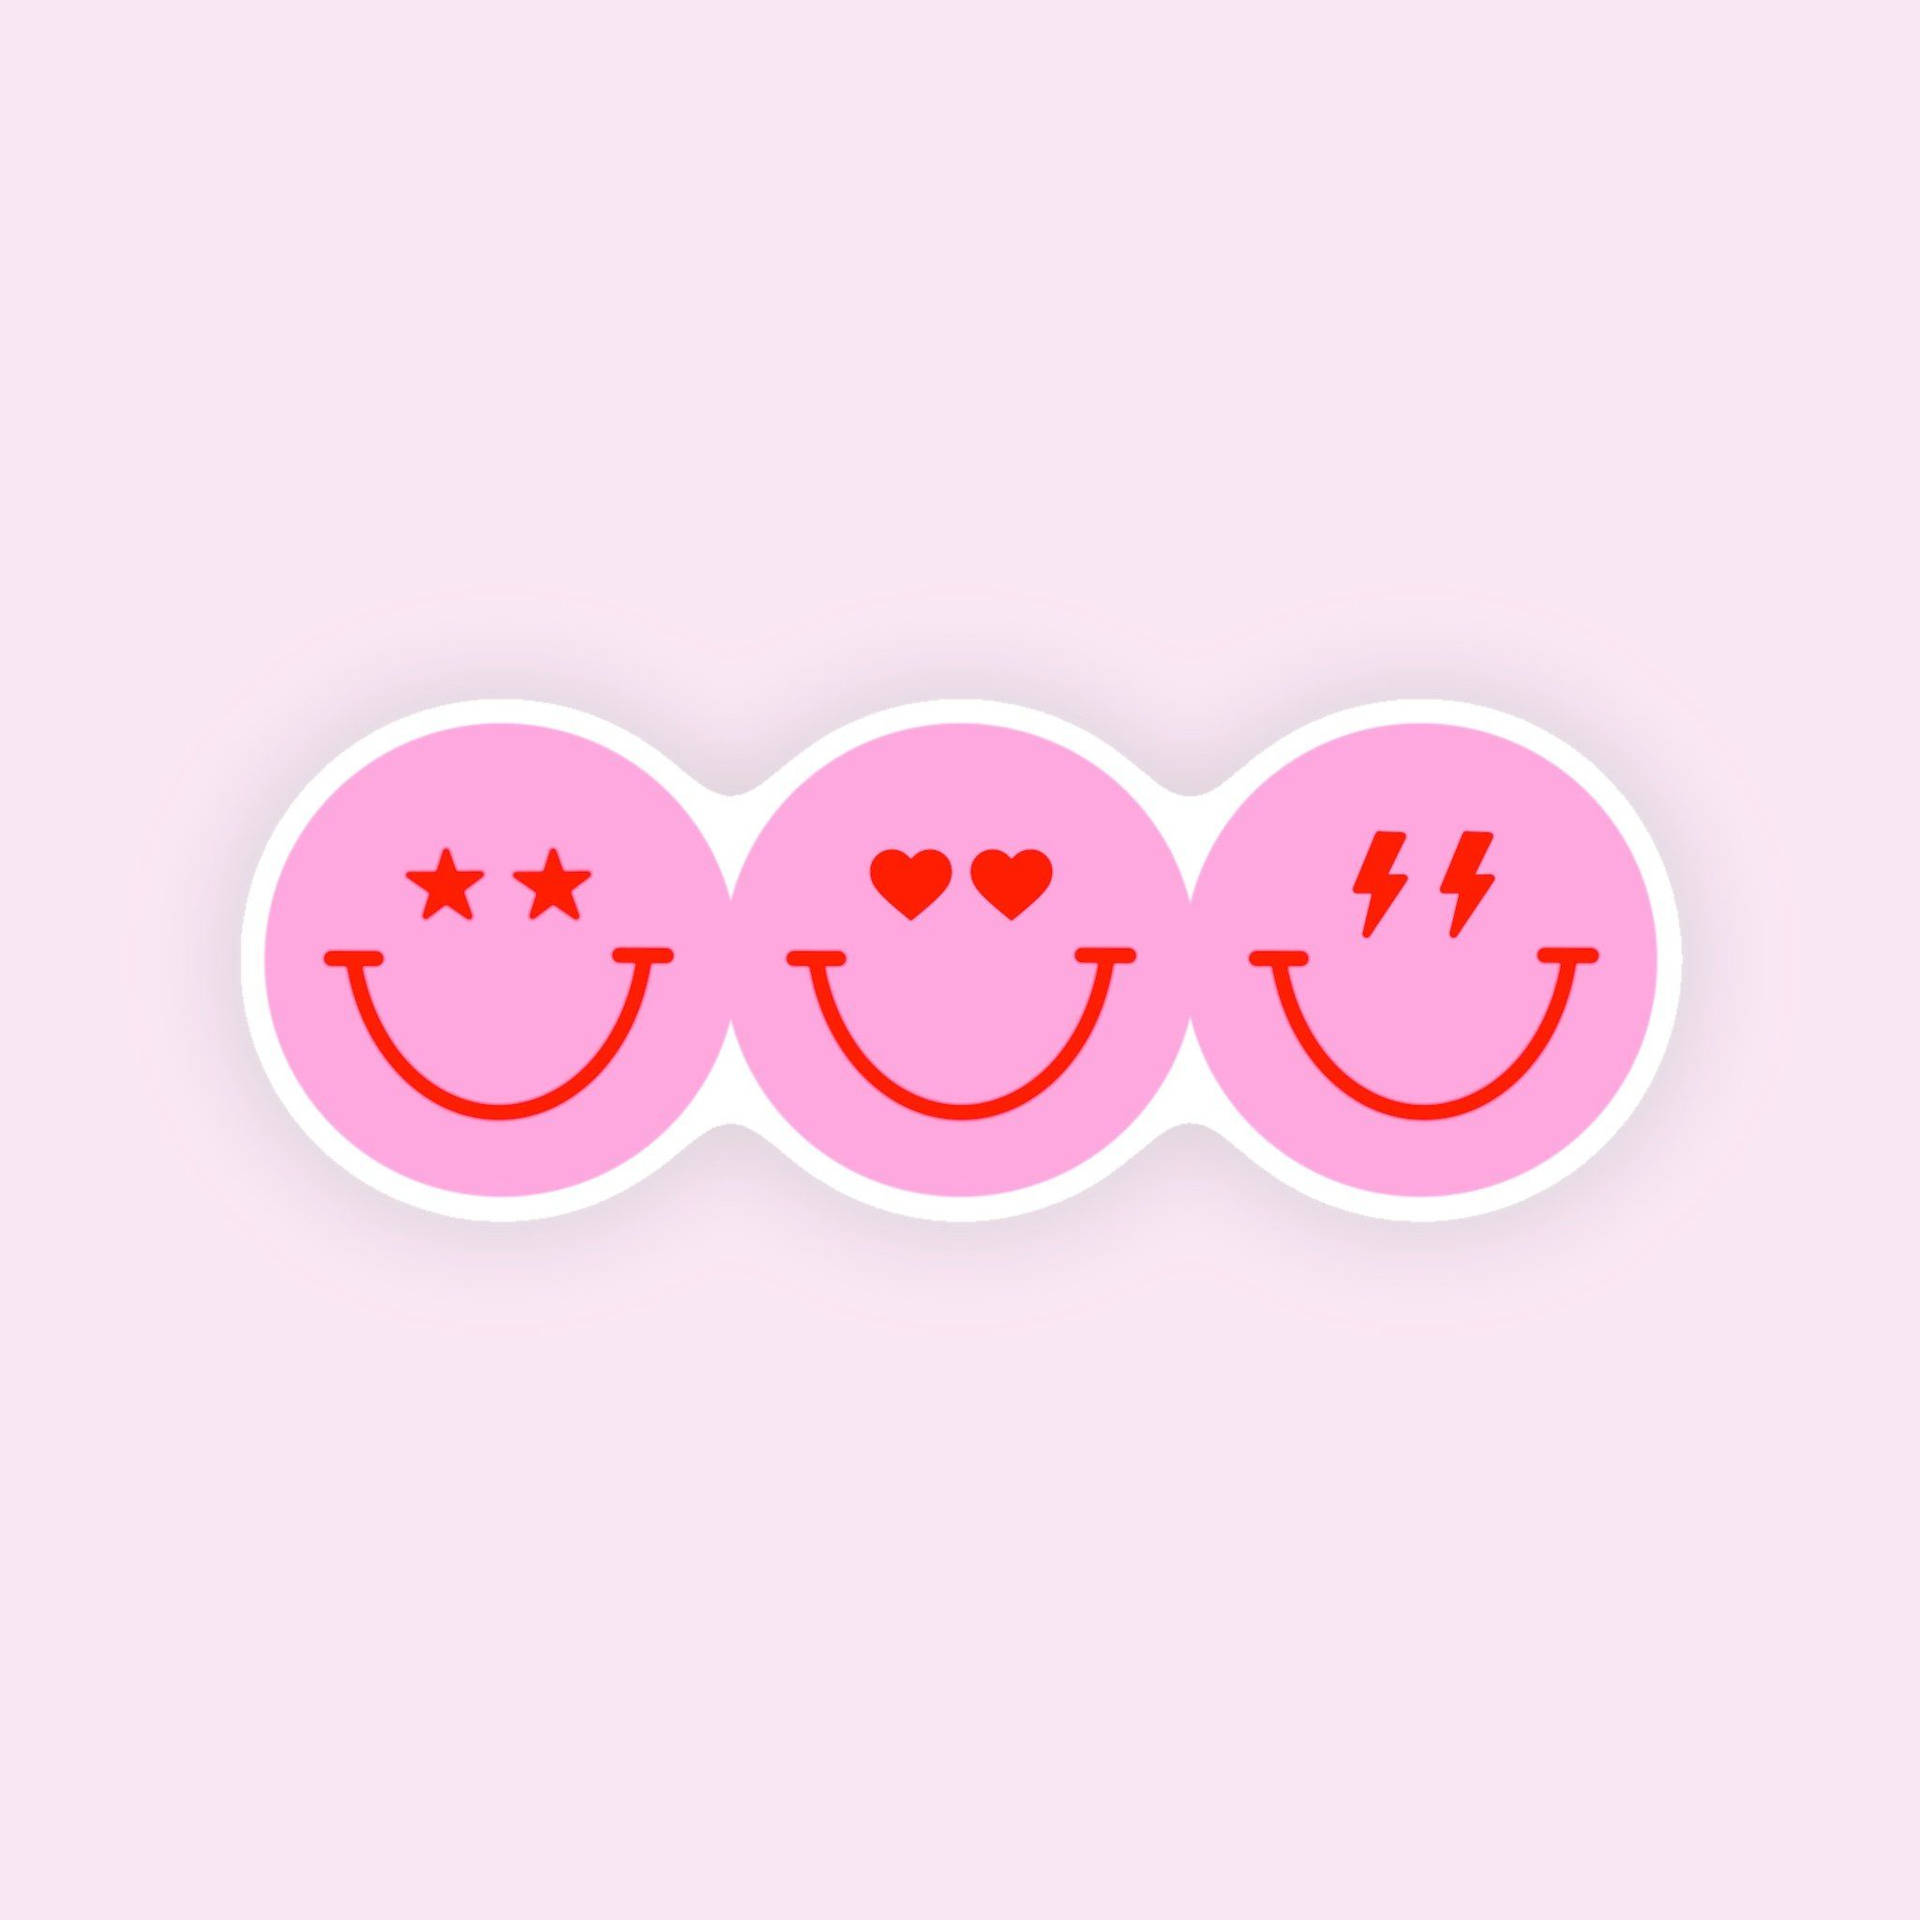 100+] Preppy Smiley Face Wallpapers 